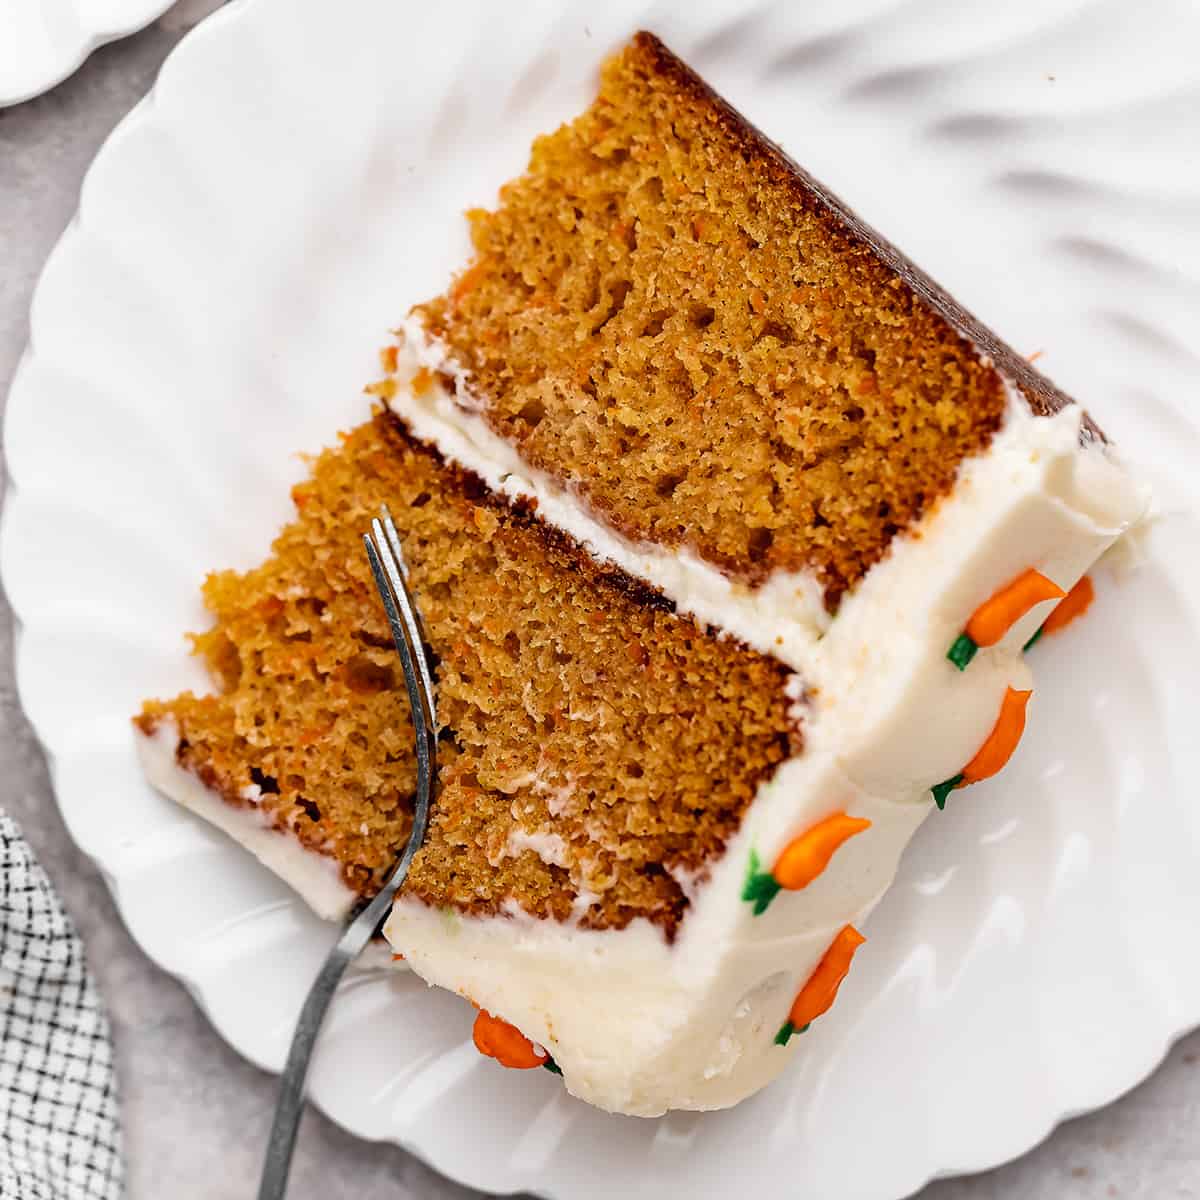 a fork taking a bite out of a slice of Carrot Cake